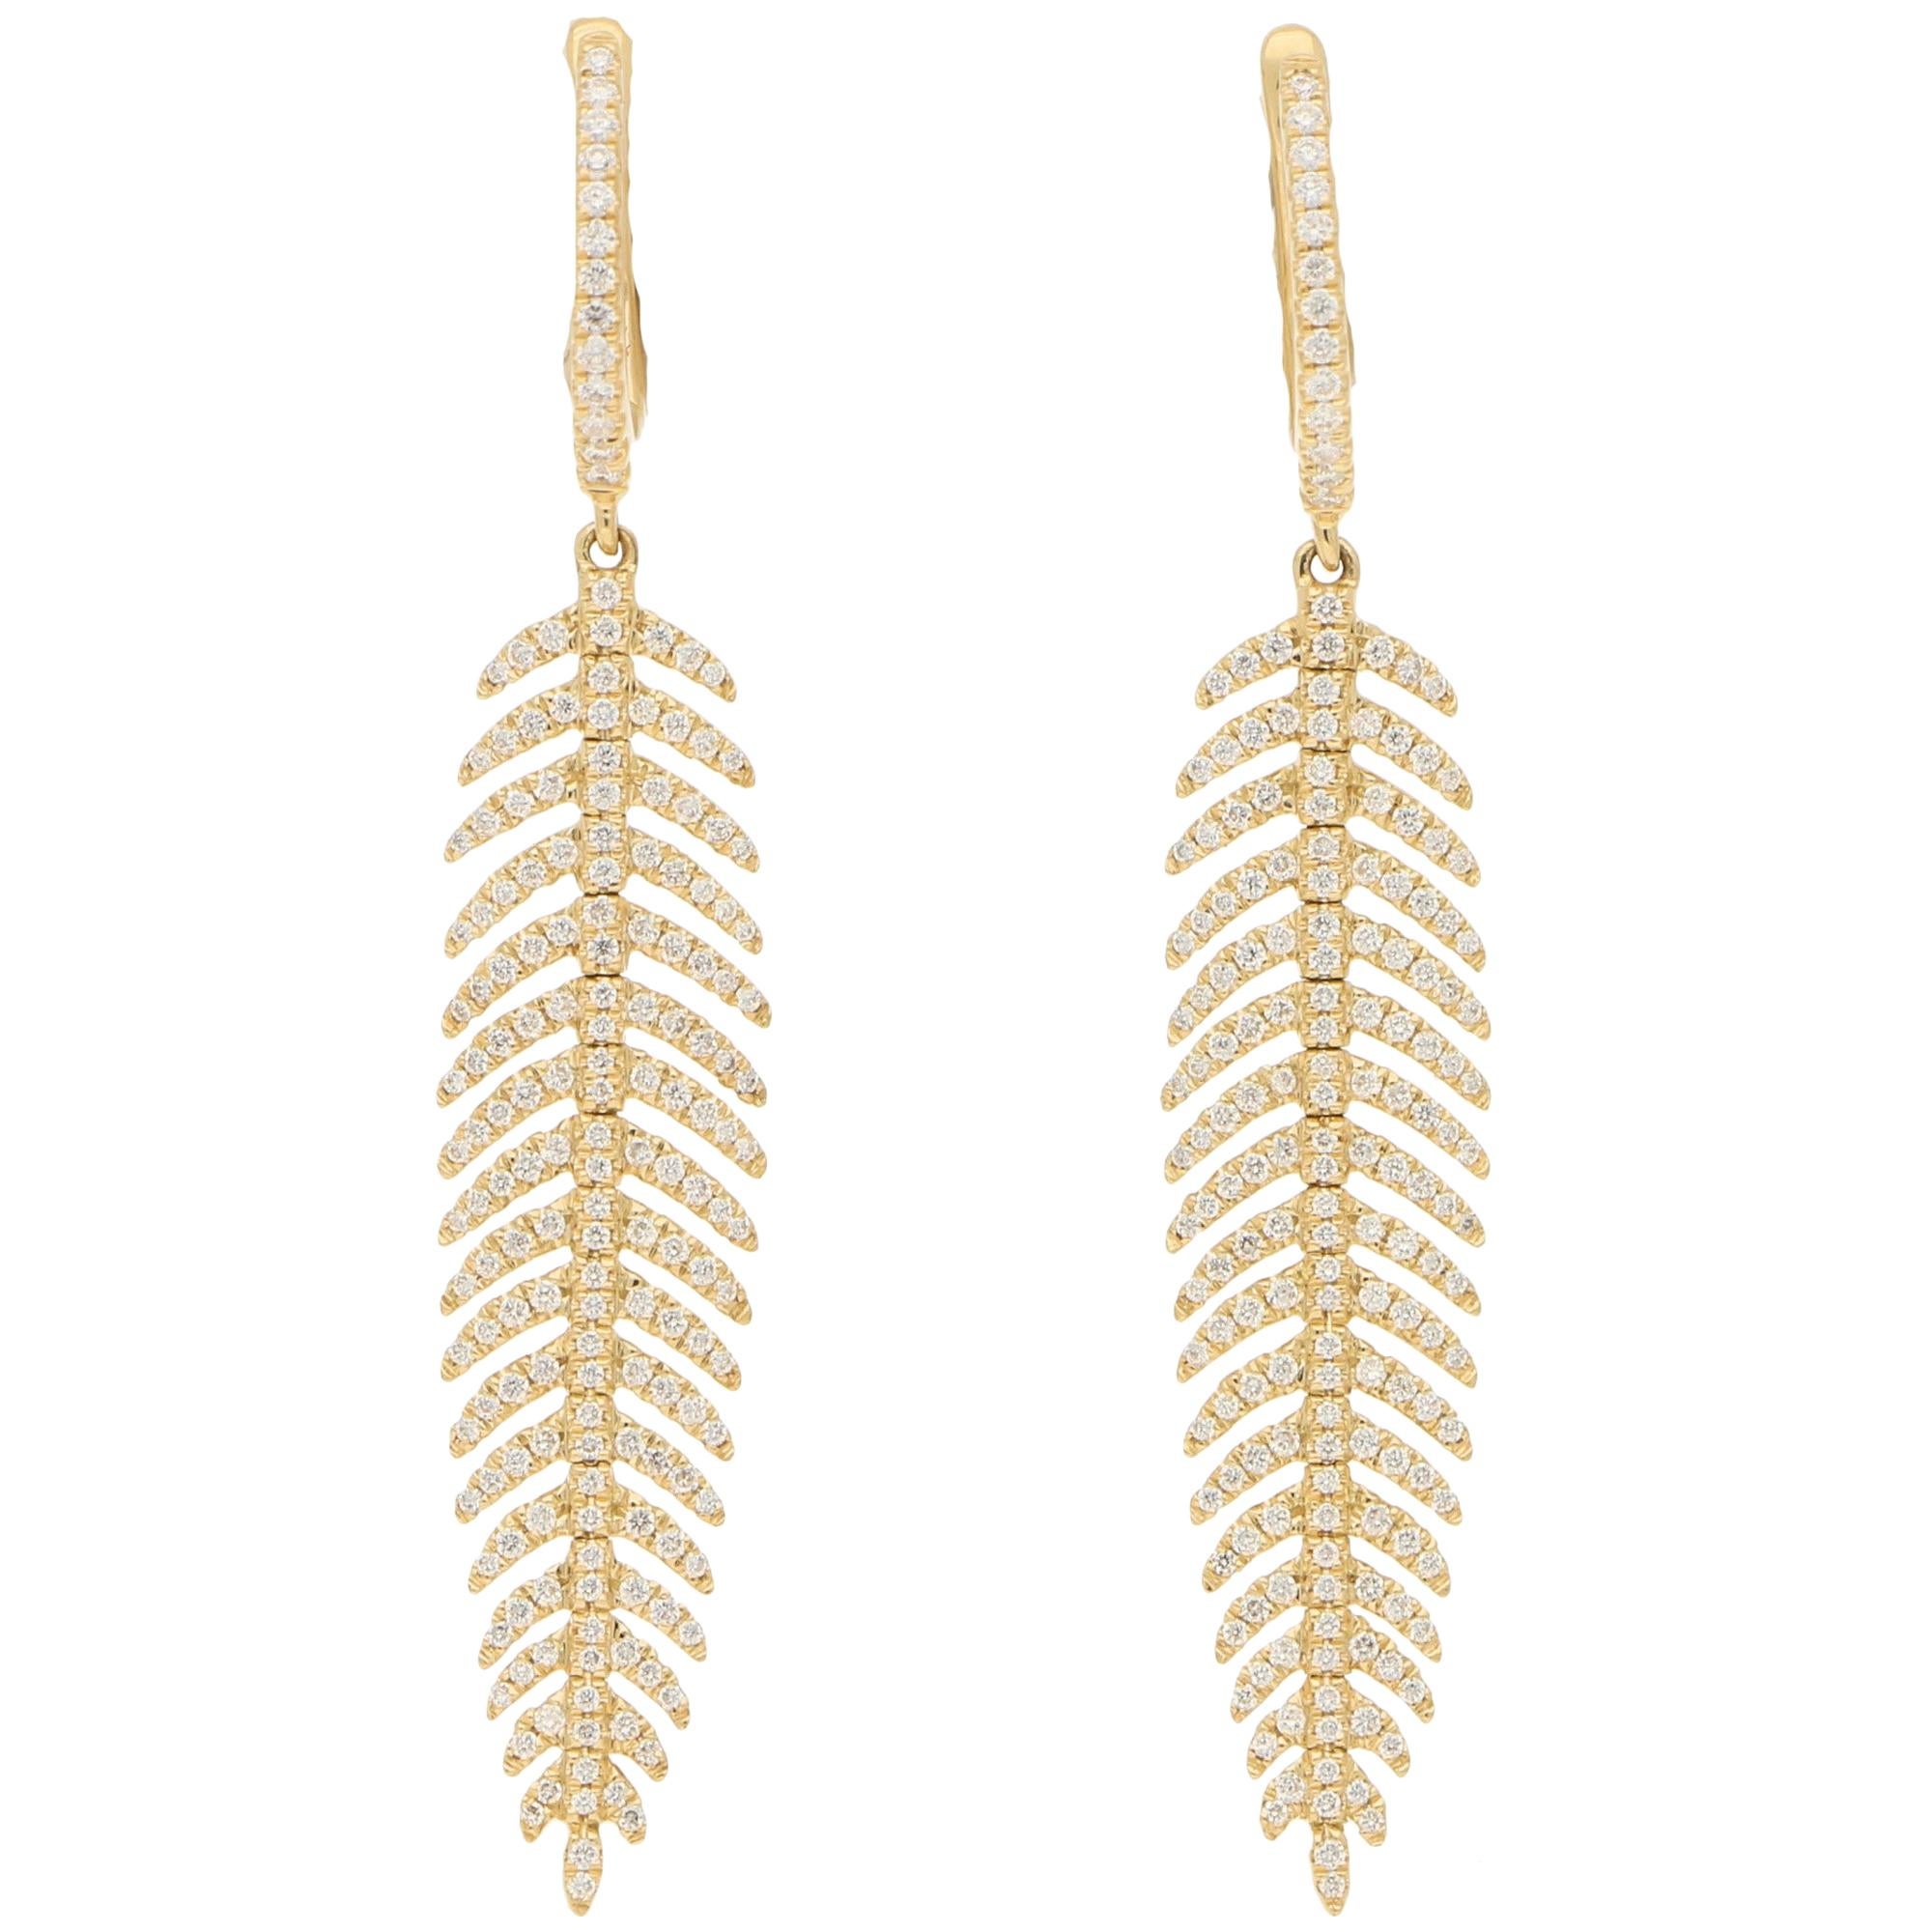 Articulated Diamond Drop Feather Earrings in 18 Karat Yellow Gold